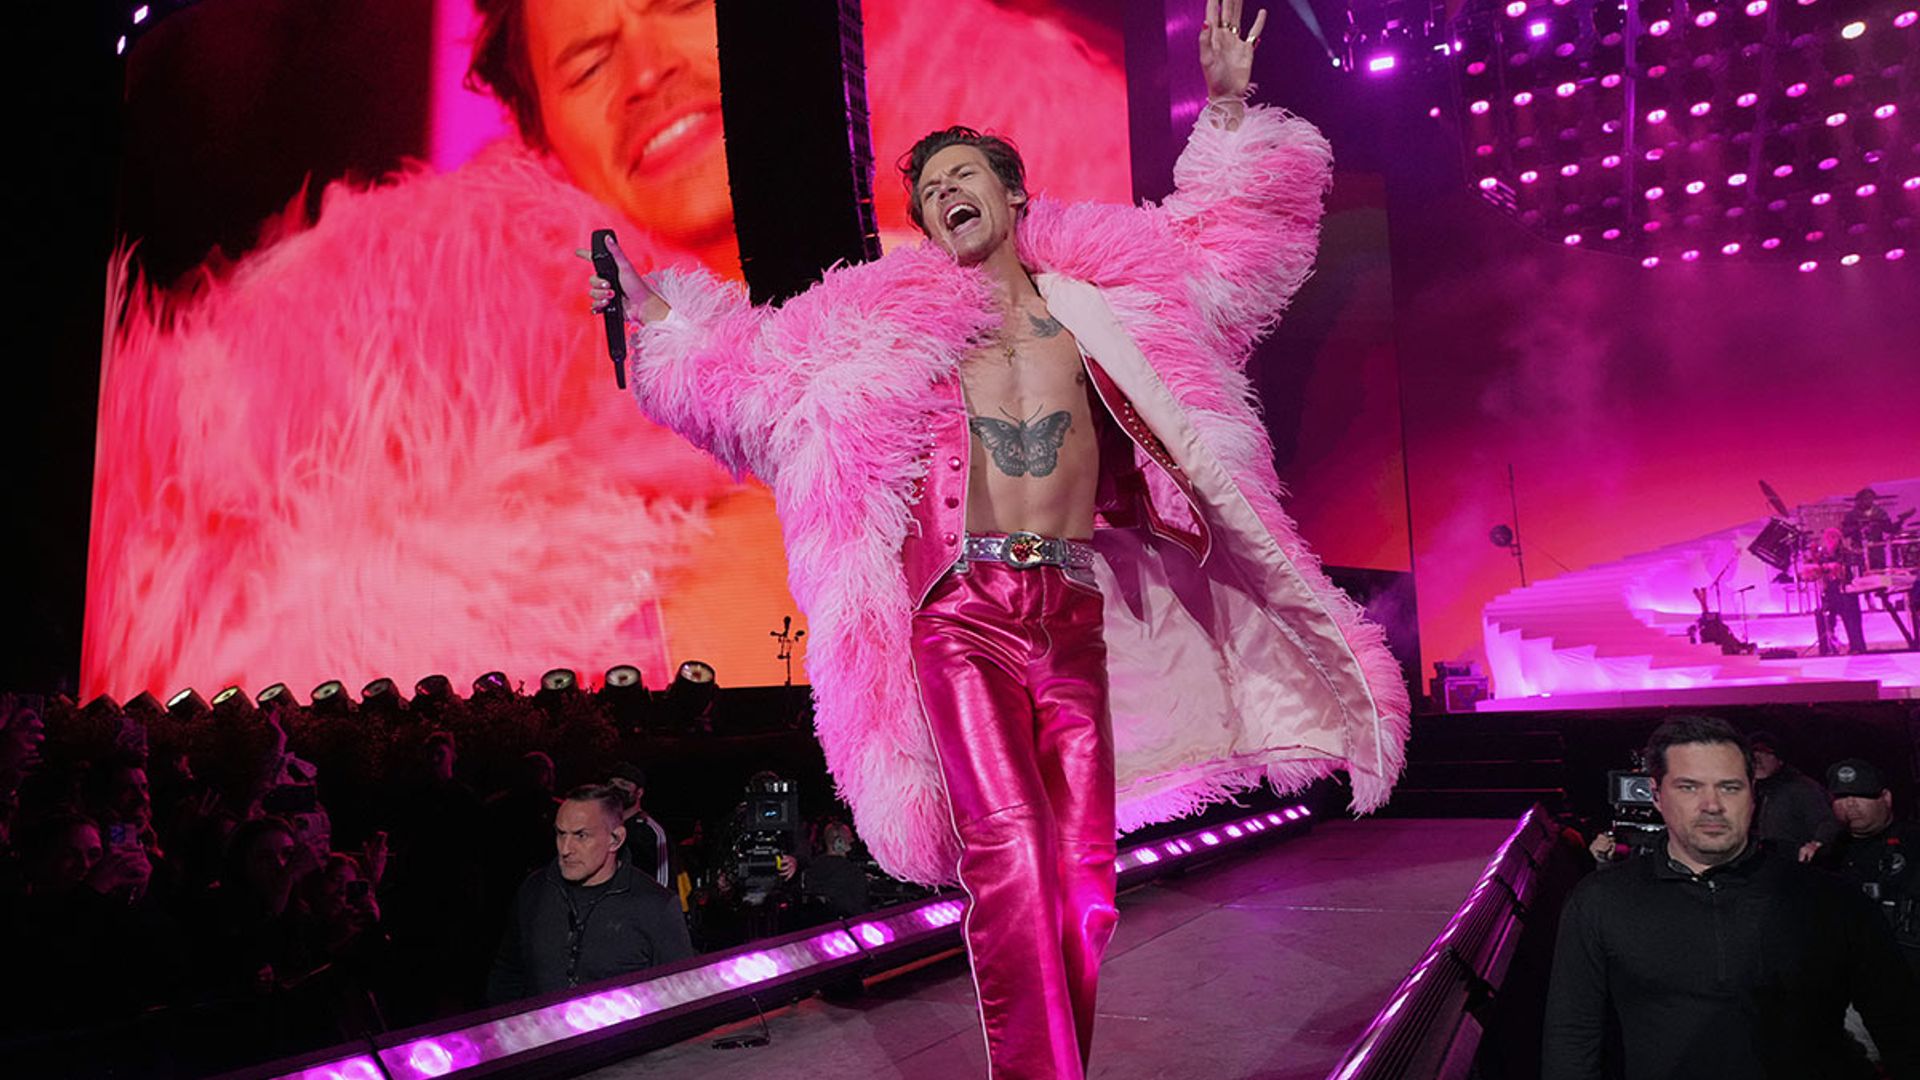 Harry Styles' most stylish moments: from pink feathers at